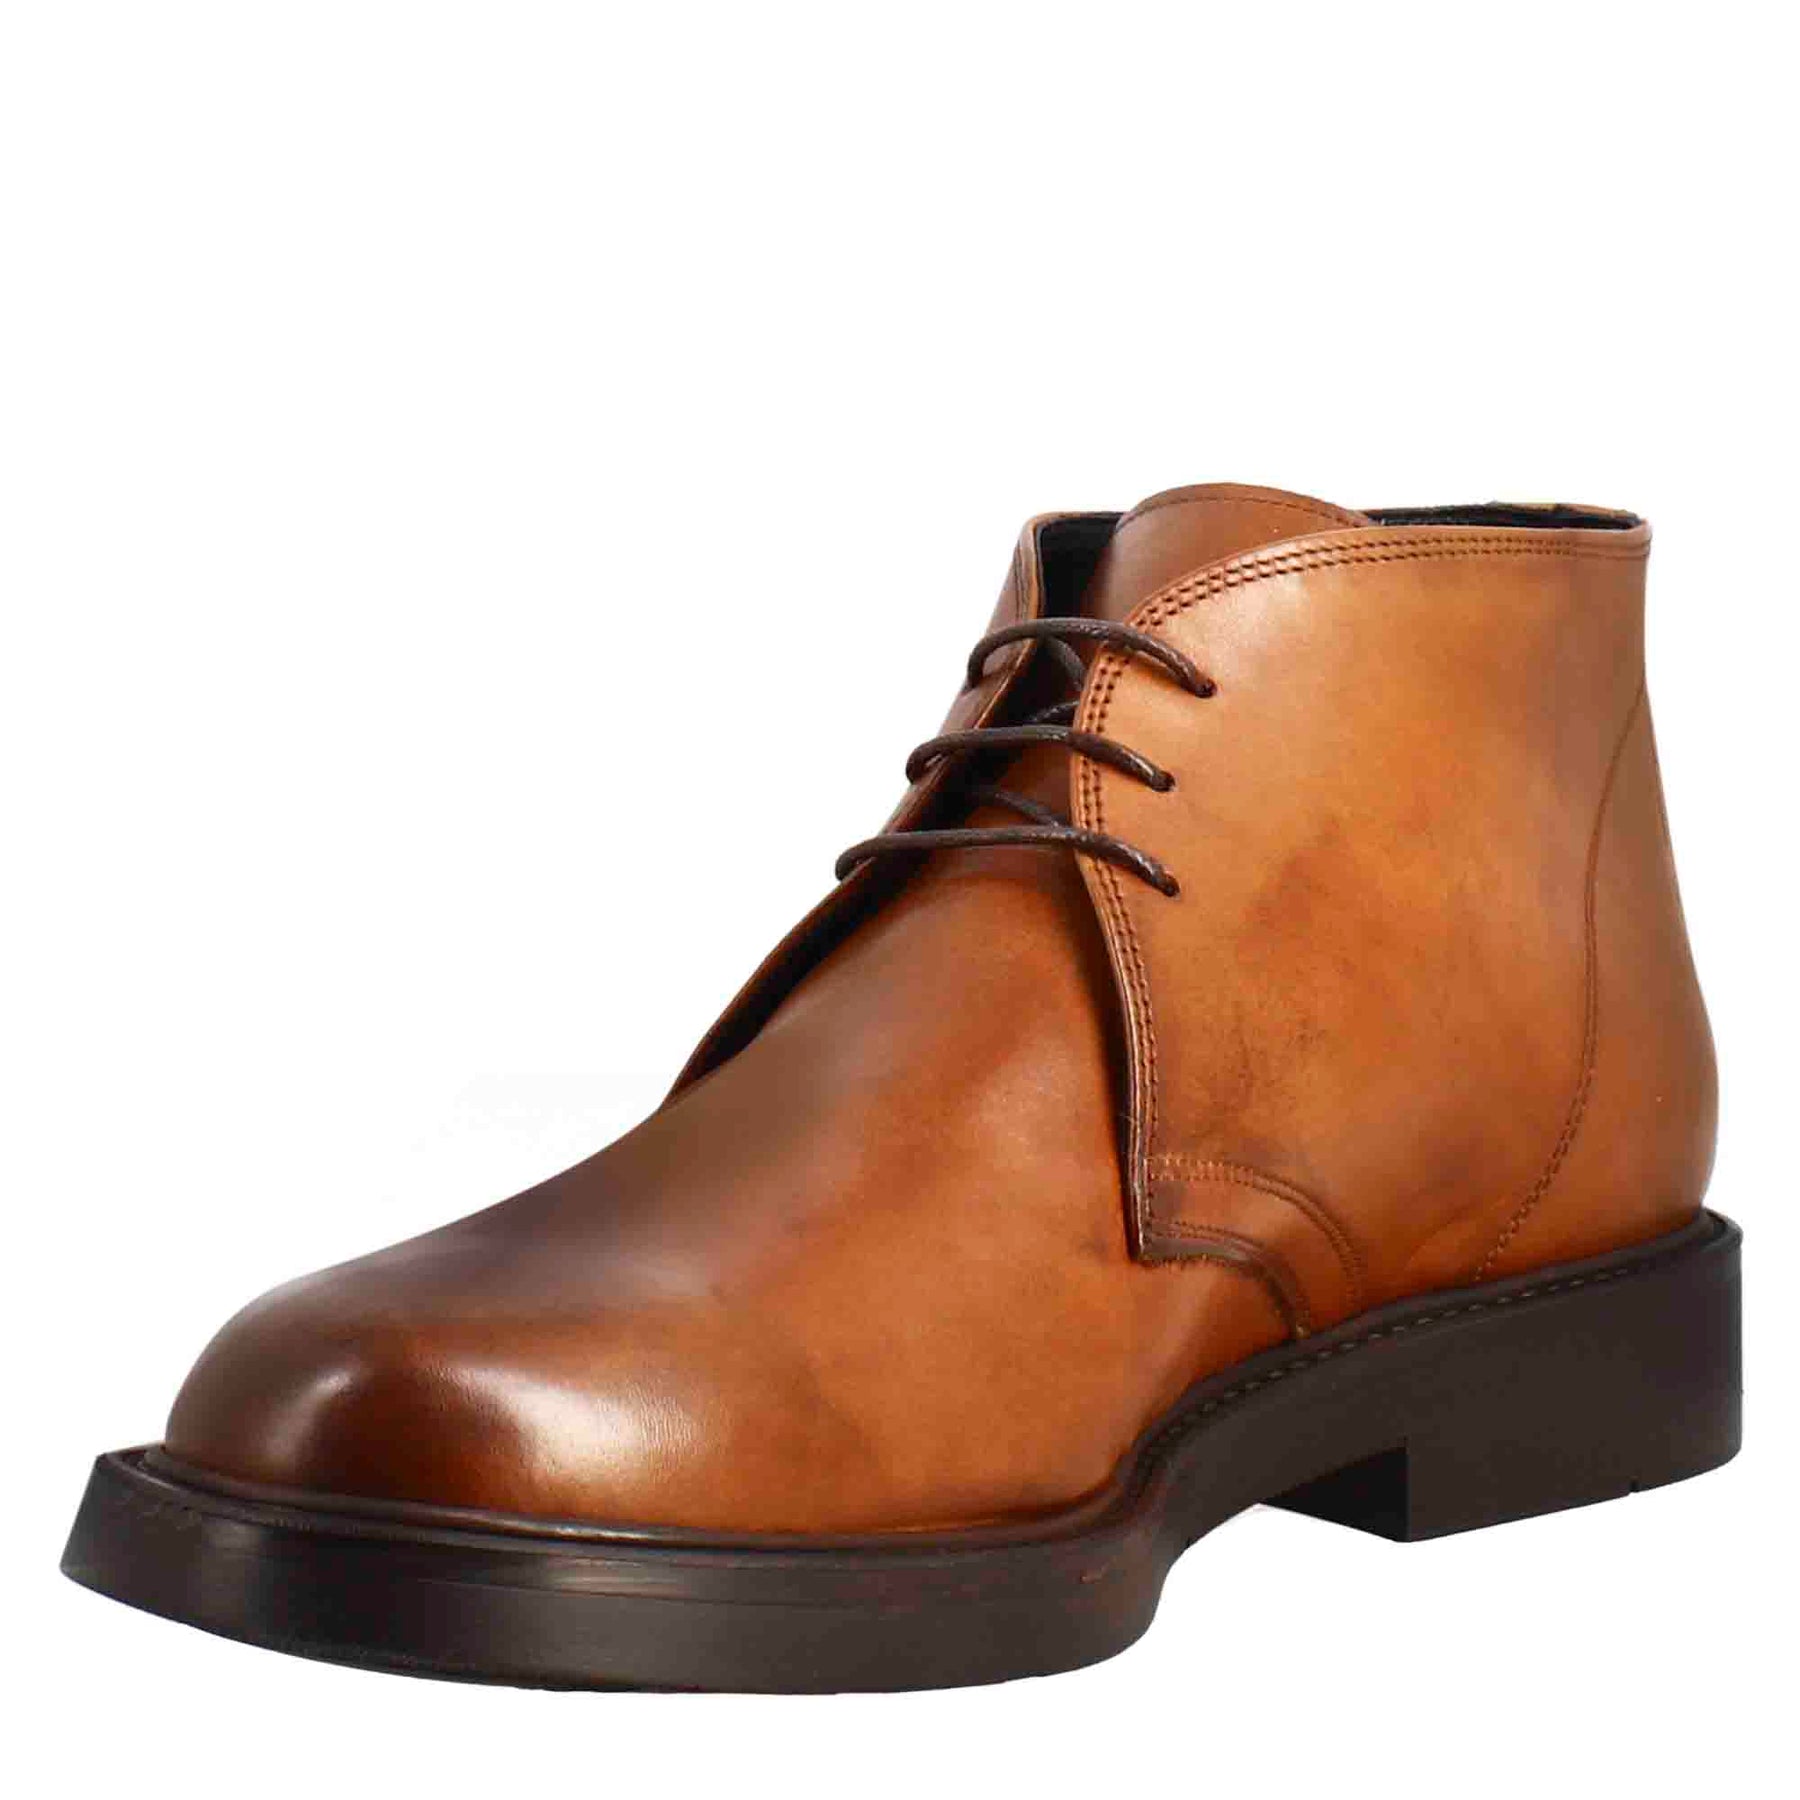 Smooth brown full-grain leather men's ankle boots